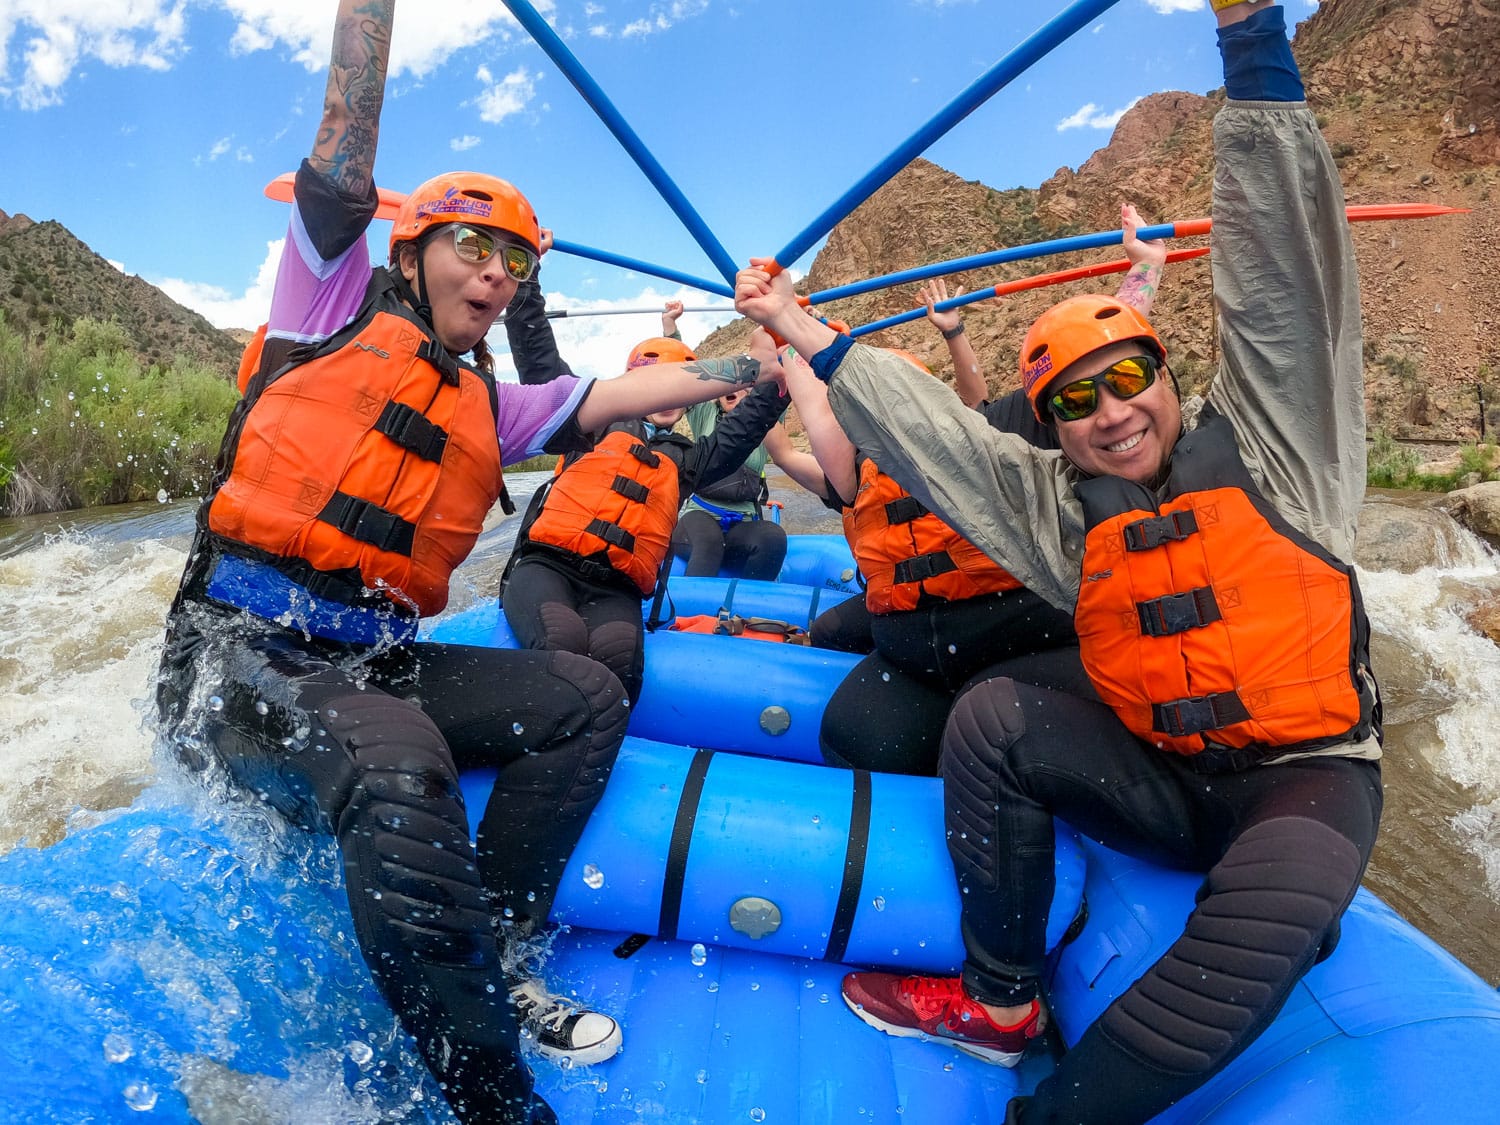 Whitewater Rafting Attire: What to Wear for a Safe Adventure